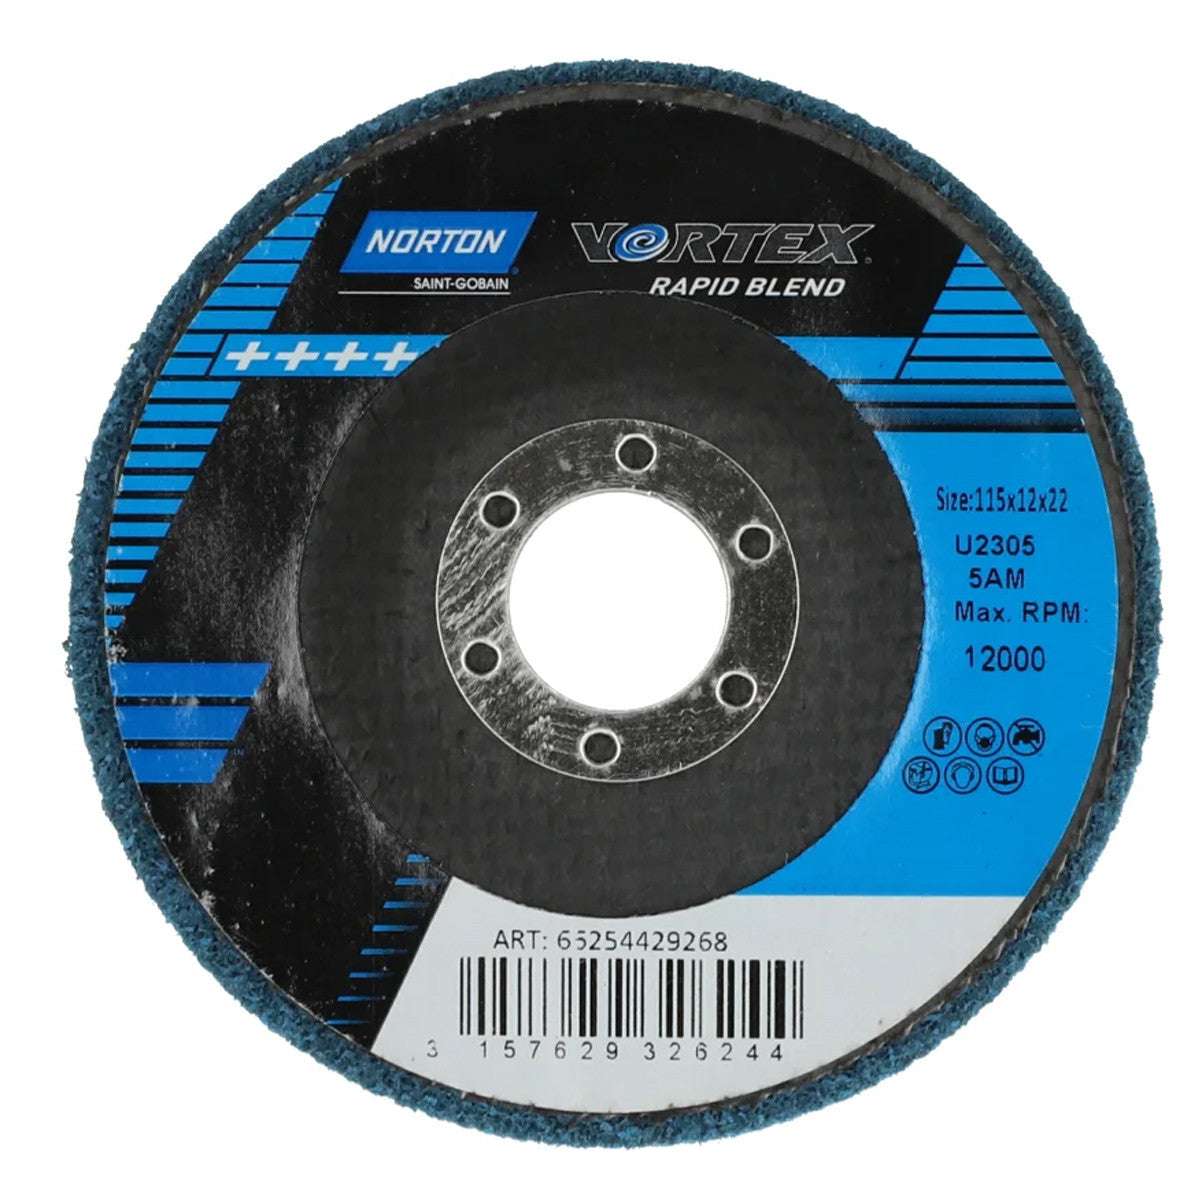 Unified discs with backing Norton-Vortex Unified 115/125 mm - Norton